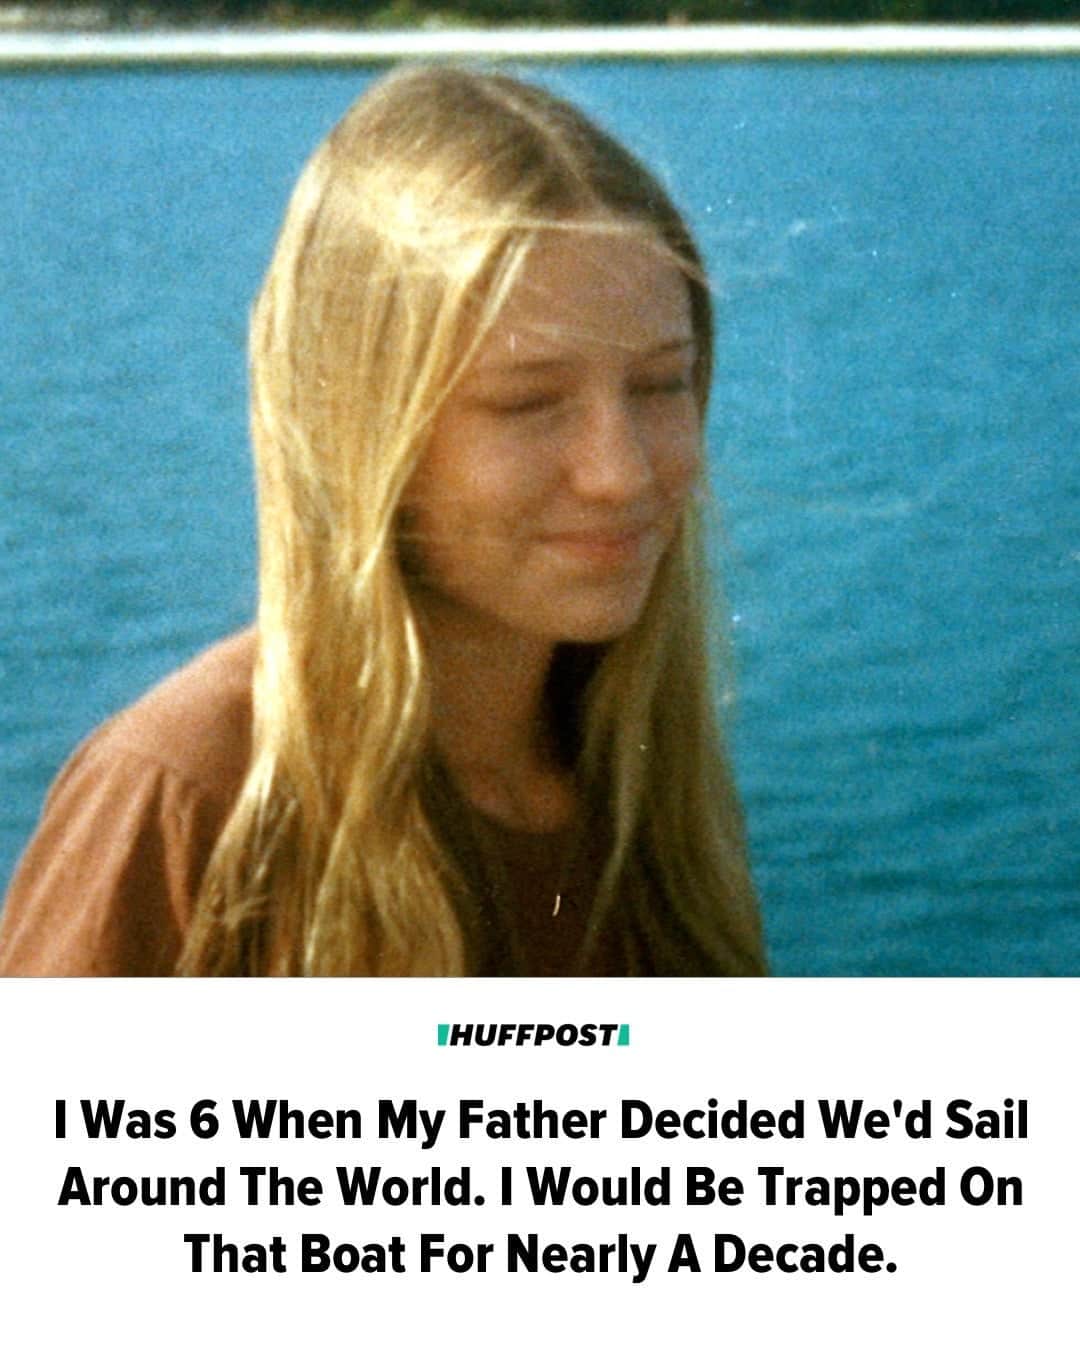 Huffington Postのインスタグラム：「"It has taken me decades to be ready to tell this story," writes HuffPost guest writer Suzanne Heywood. "Until I reached the safety of adulthood and created my own family, I wasn’t able to confront my parents’ story about my past. In their telling, I was 'privileged.' After all, I grew up on a beautiful boat called Wavewalker, sailing around the world."  "Of course I knew their story wasn’t true," Heywood continues. "Although I had grown up on Wavewalker from the age of 7 for almost a decade, I was trapped there — unable to go to school or have friends. While my brother was allowed to help out on deck, I was expected to cook and clean down below for hours each day."  Read more at our link in bio. // 📷 Courtesy of Suzanne Heywood」